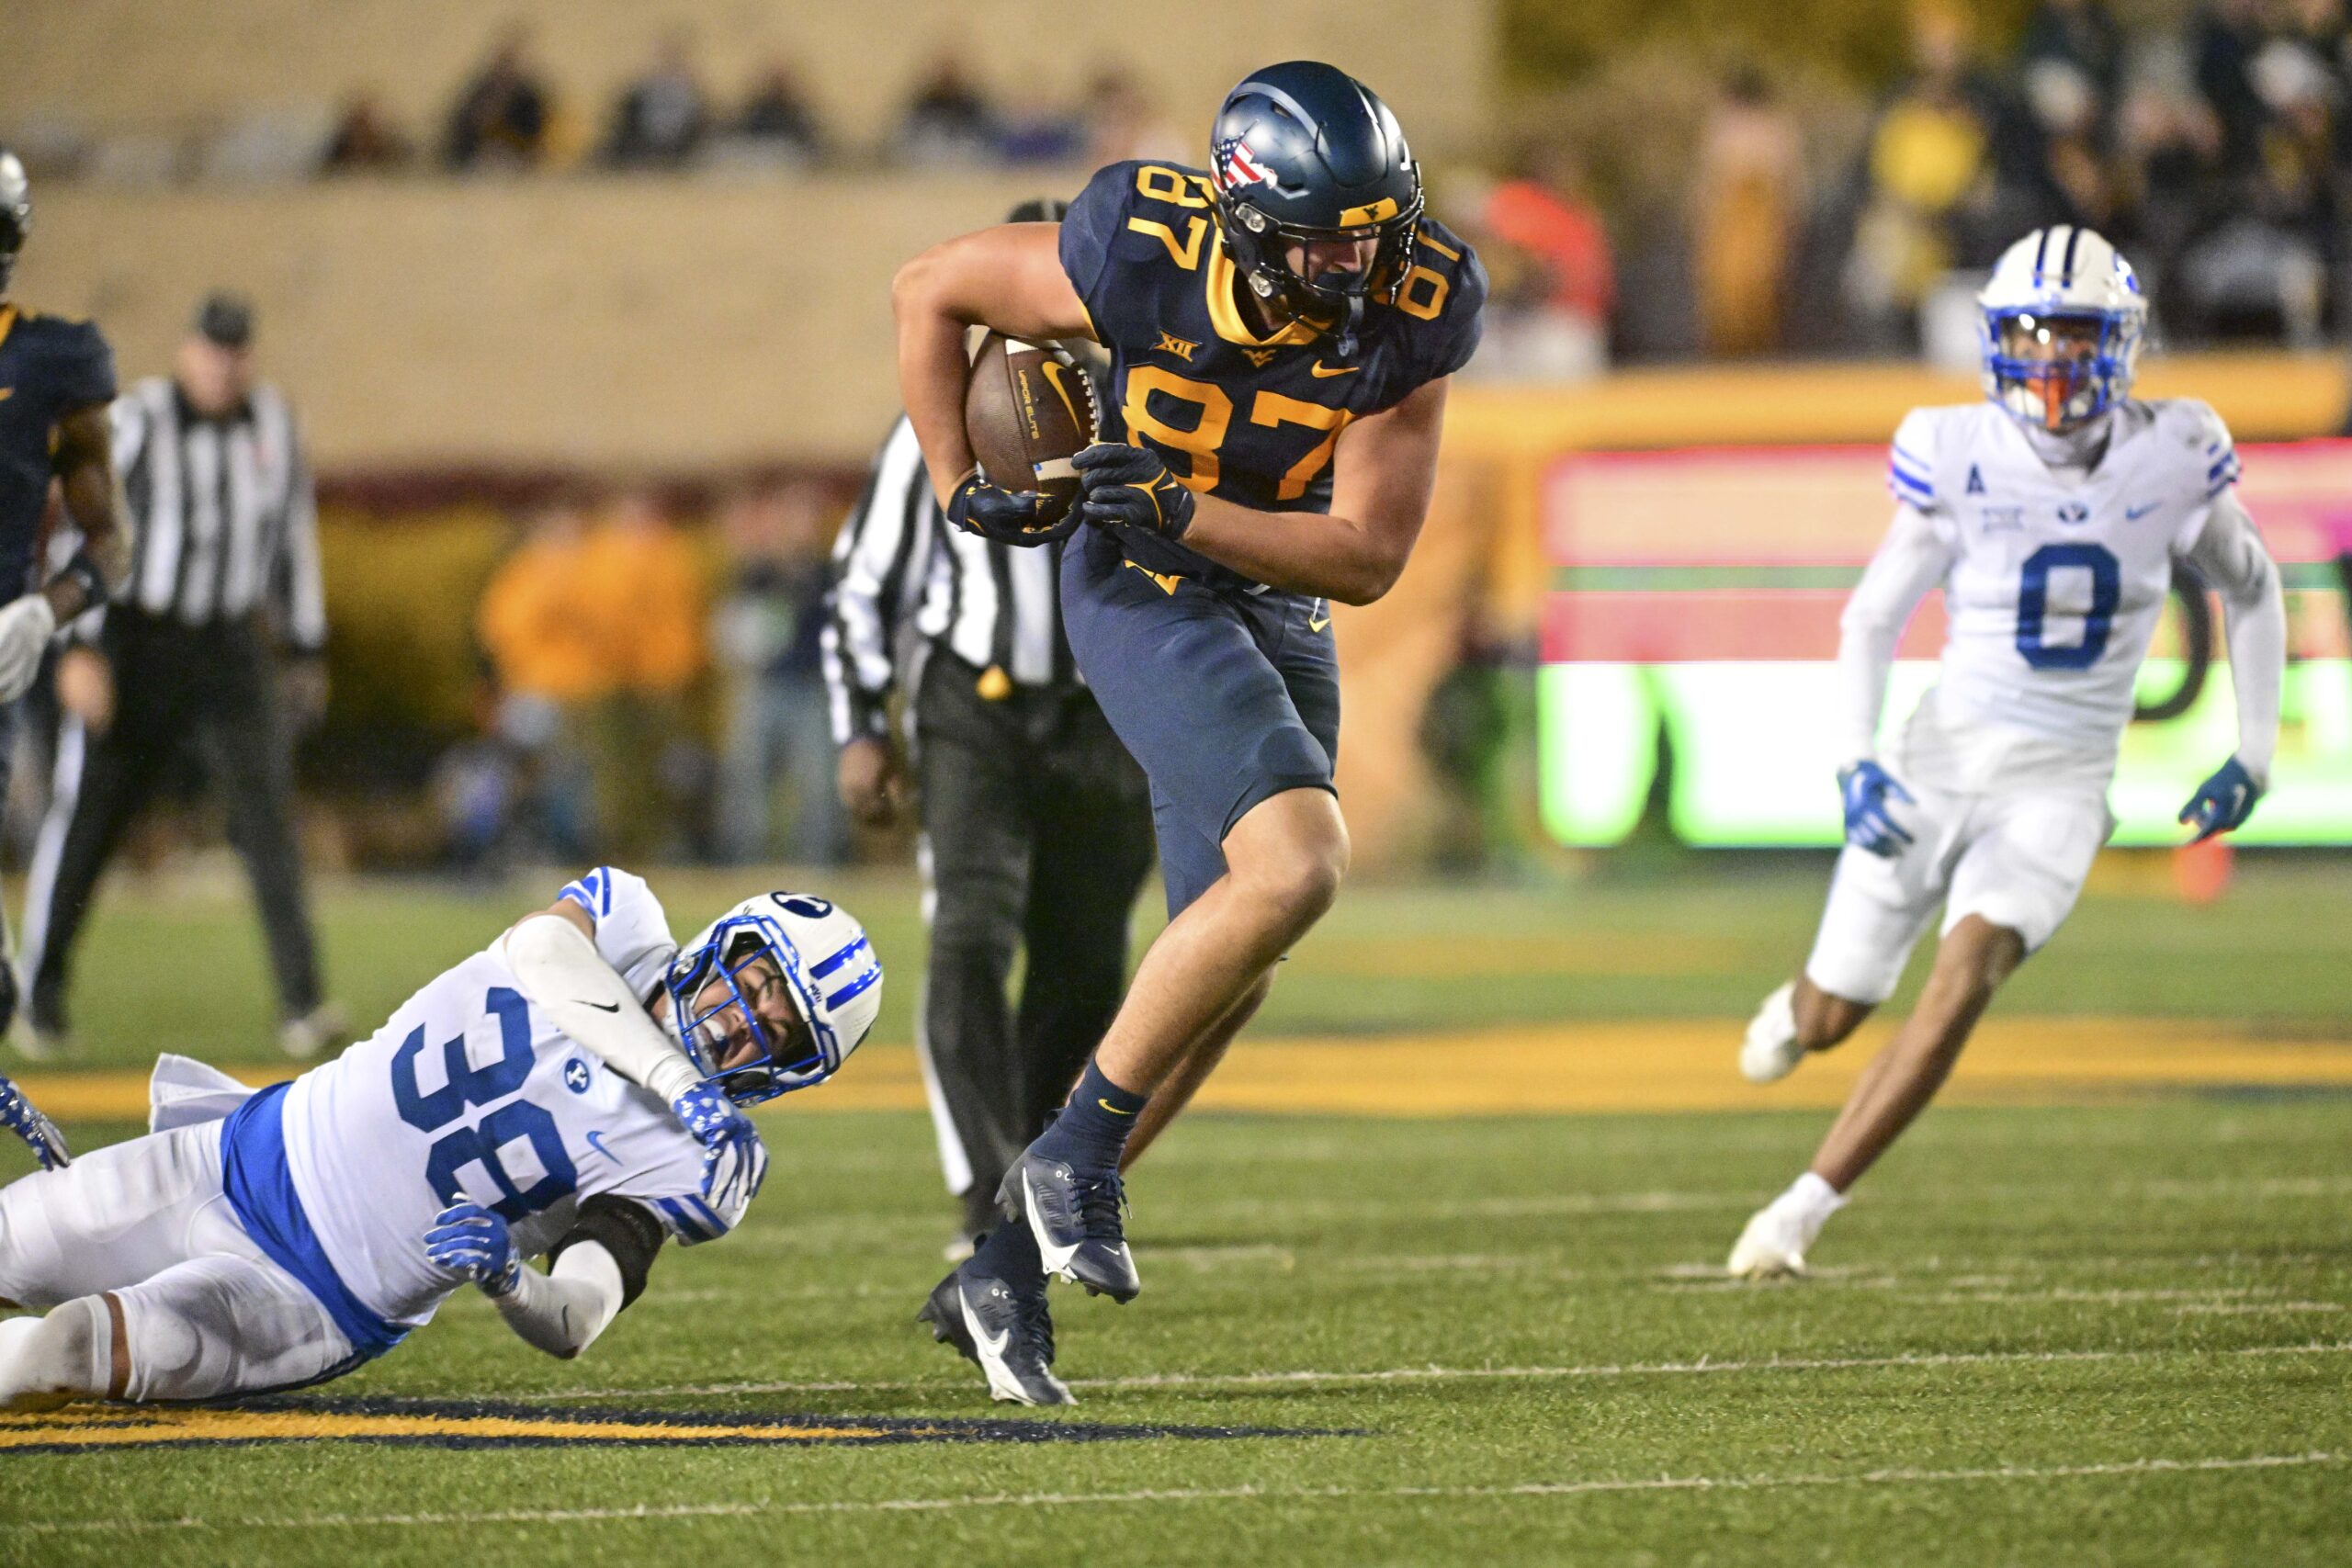 WVU football position preview: Top tight ends Taylor and Davis look to expand their roles in West Virginia’s offense